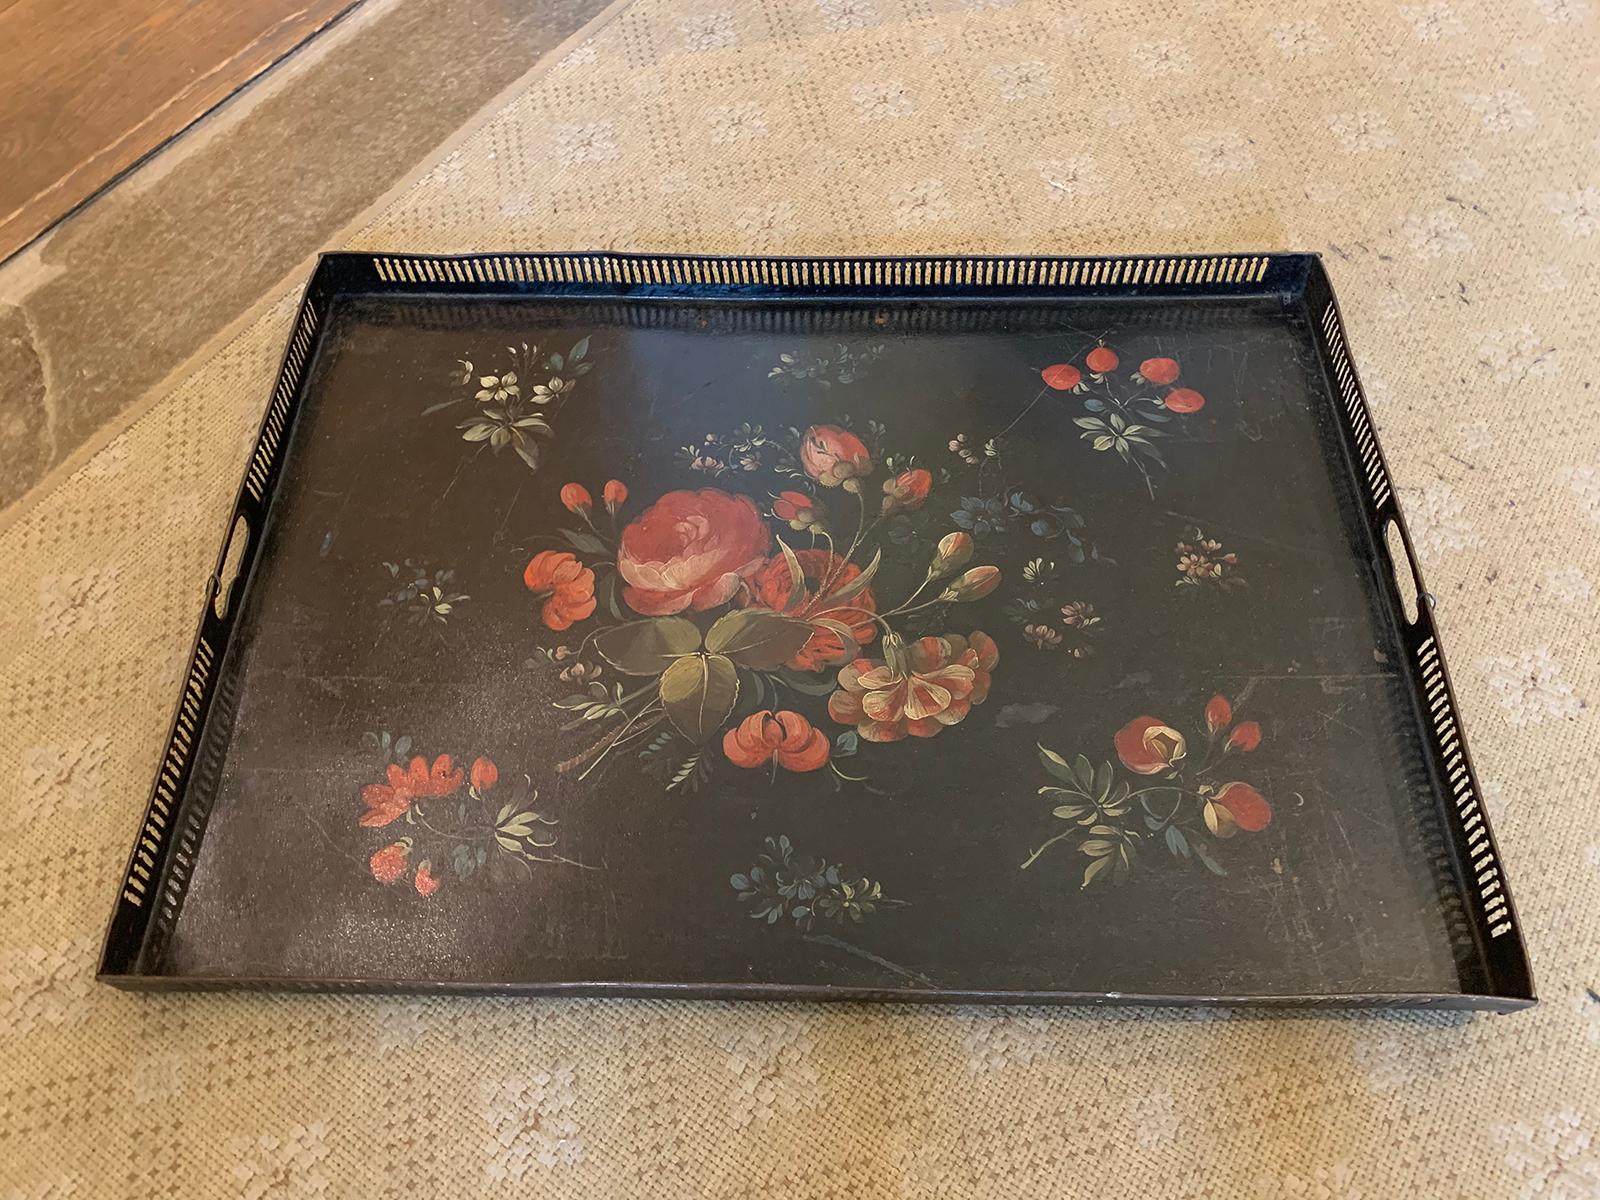 Hand-Painted 19th Century circa 1810 Painted Floral Tole Tray with Pierced Edge